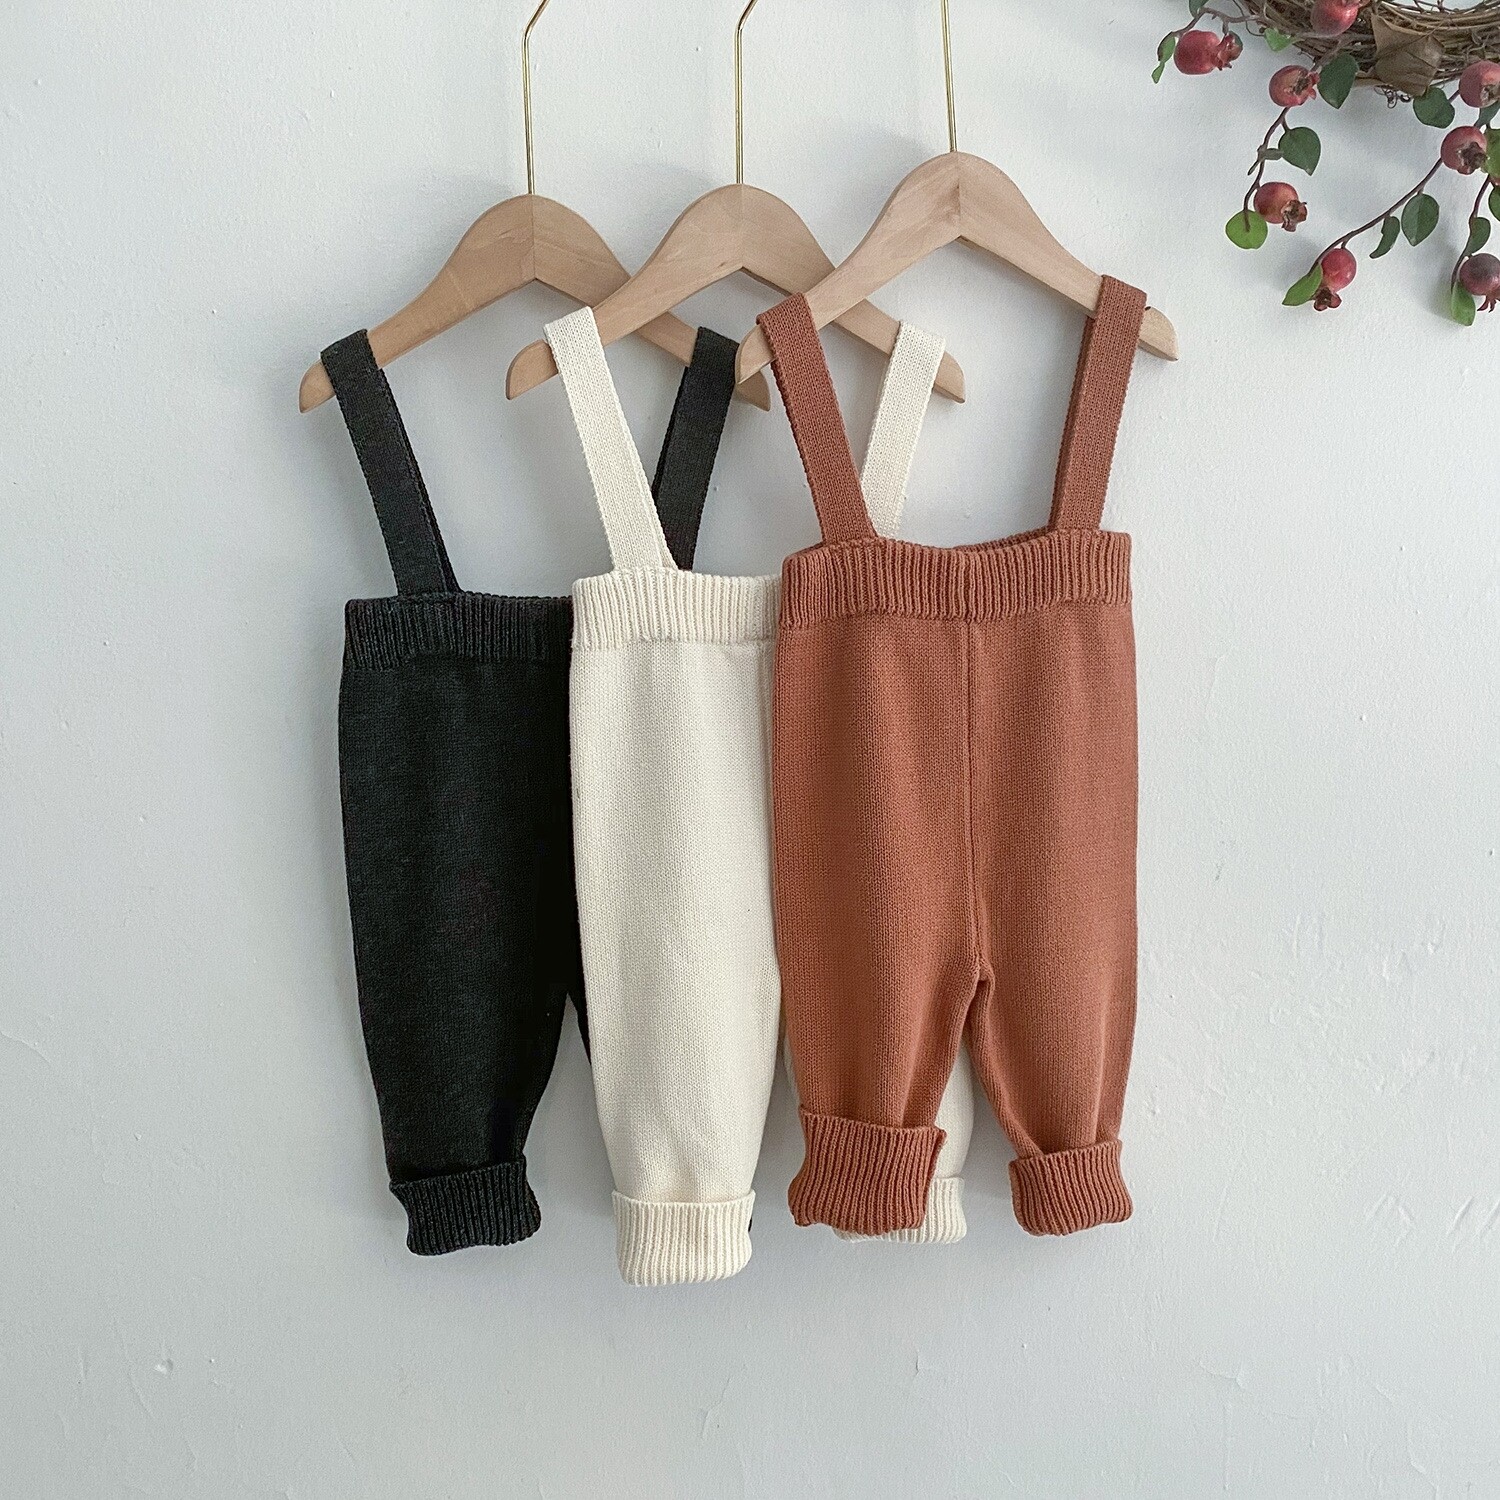 Annie & Charles | Knitted pants with suspenders 6 months-3 years - cotton OEKO-TEX - made in Austria